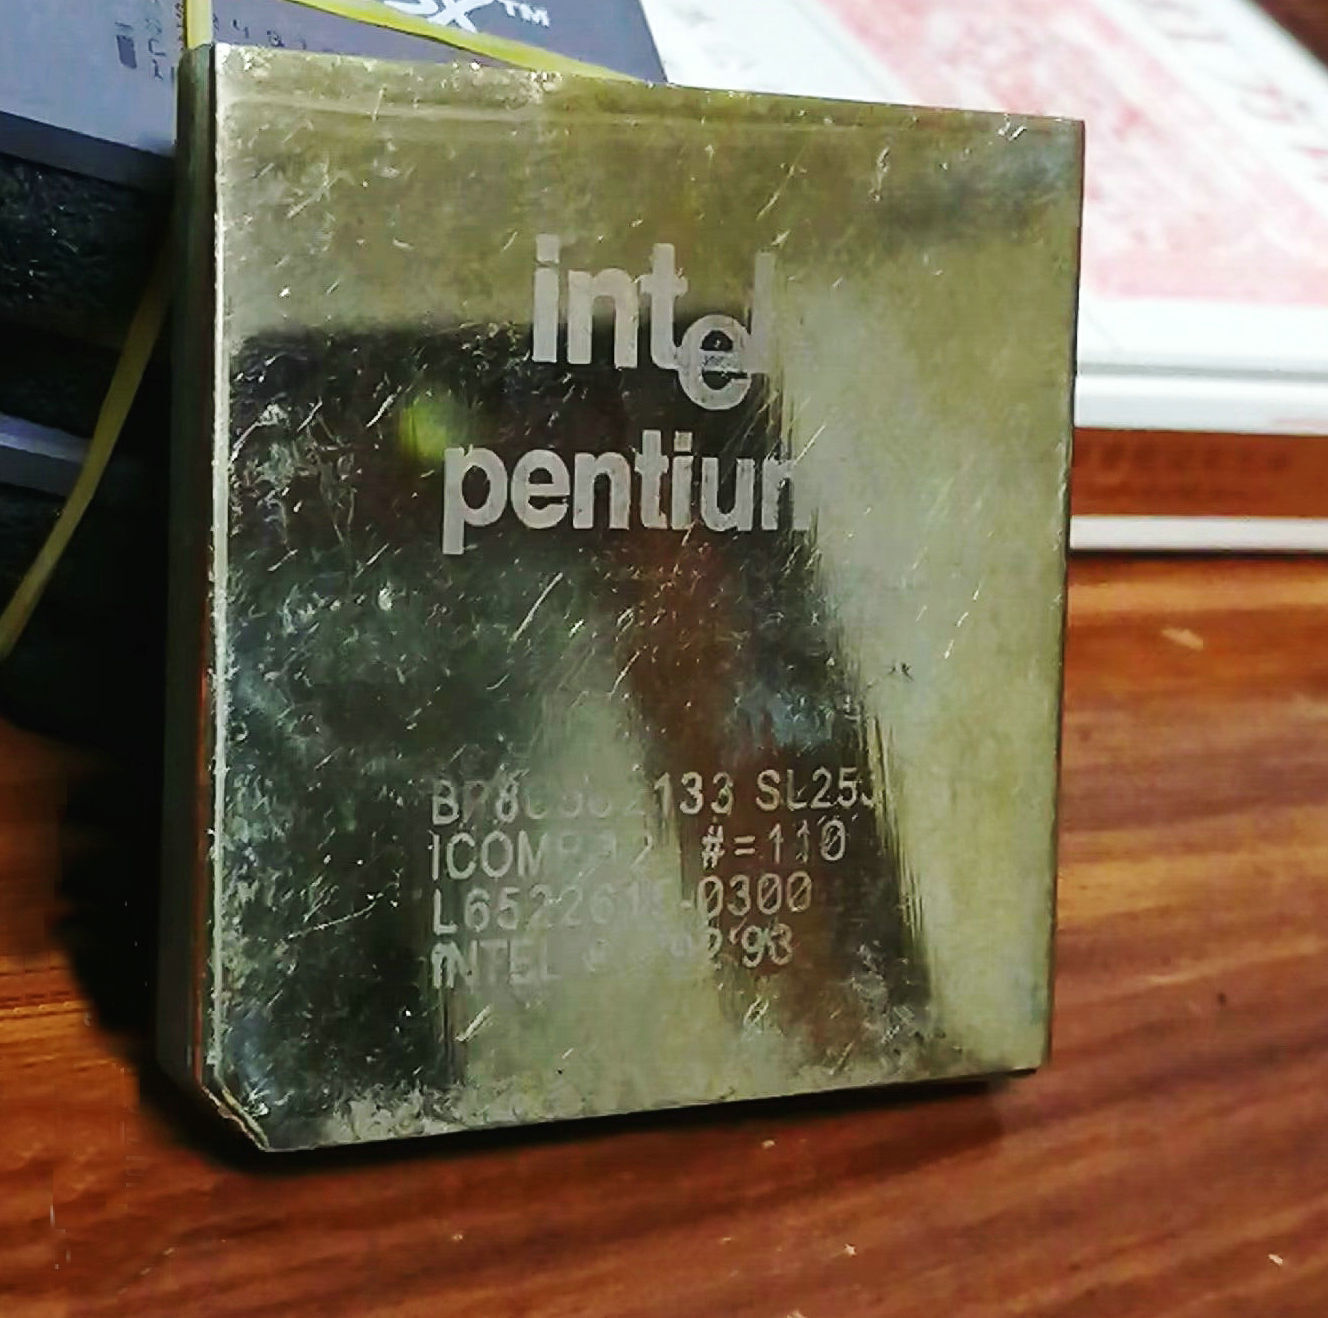 High Collection Value of Intel PENTIUM SL25J Gold Plated CPU